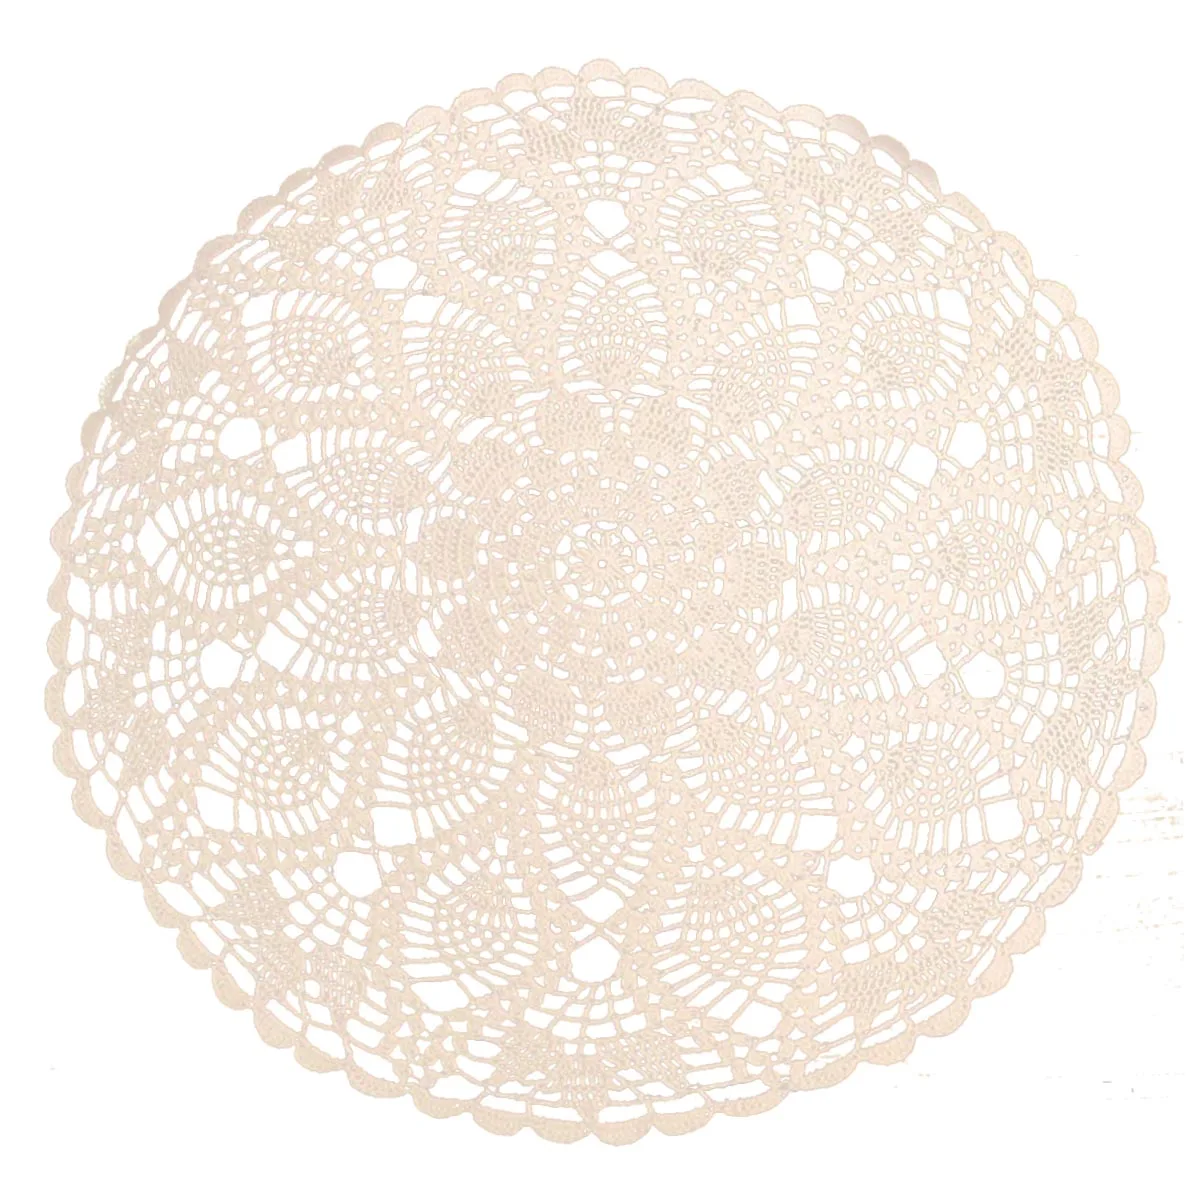 

BomHCS Handmade Crochet Lace Tablecloth Doilies Knitted Round Table Doily Coffee Shop Placemat Kitchen Place Mats